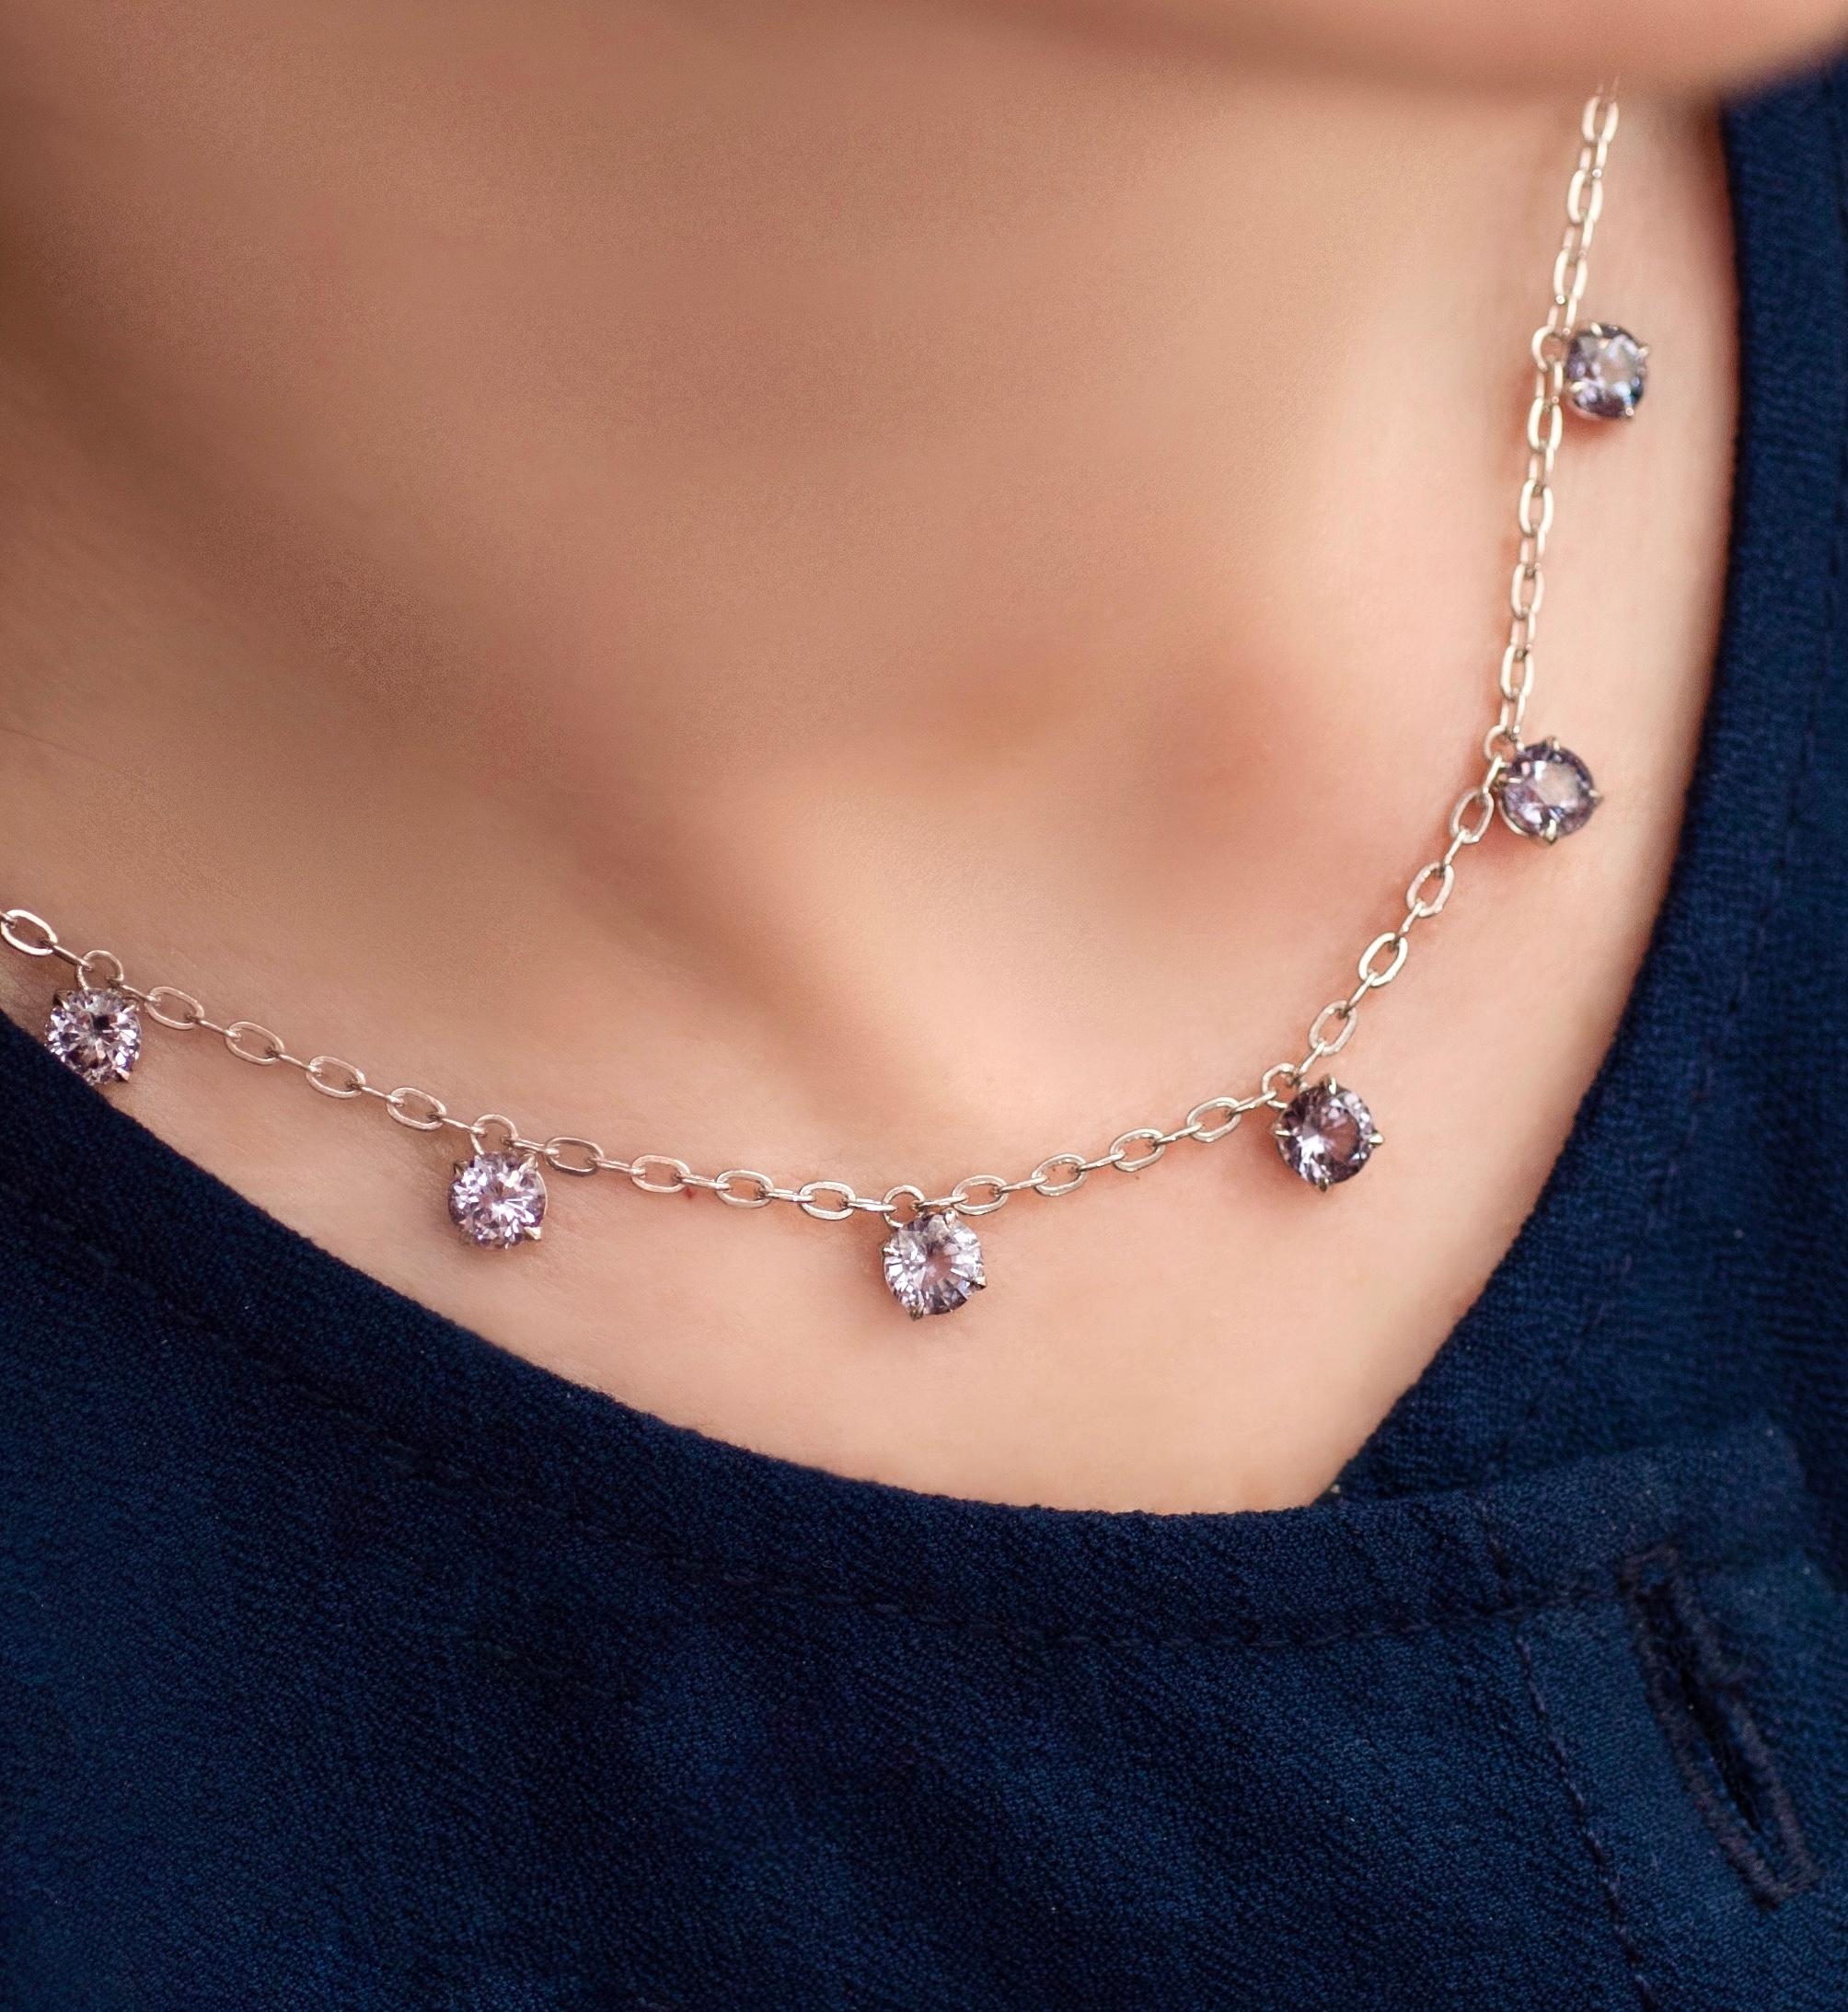 How to emphasize the neckline of a dress or a blouse and add attention to the delicate skin of the neck and finalize the outfit? 
The best idea is to use minimalist jewelry that will always be in fashion. 
For example - this white gold chain with